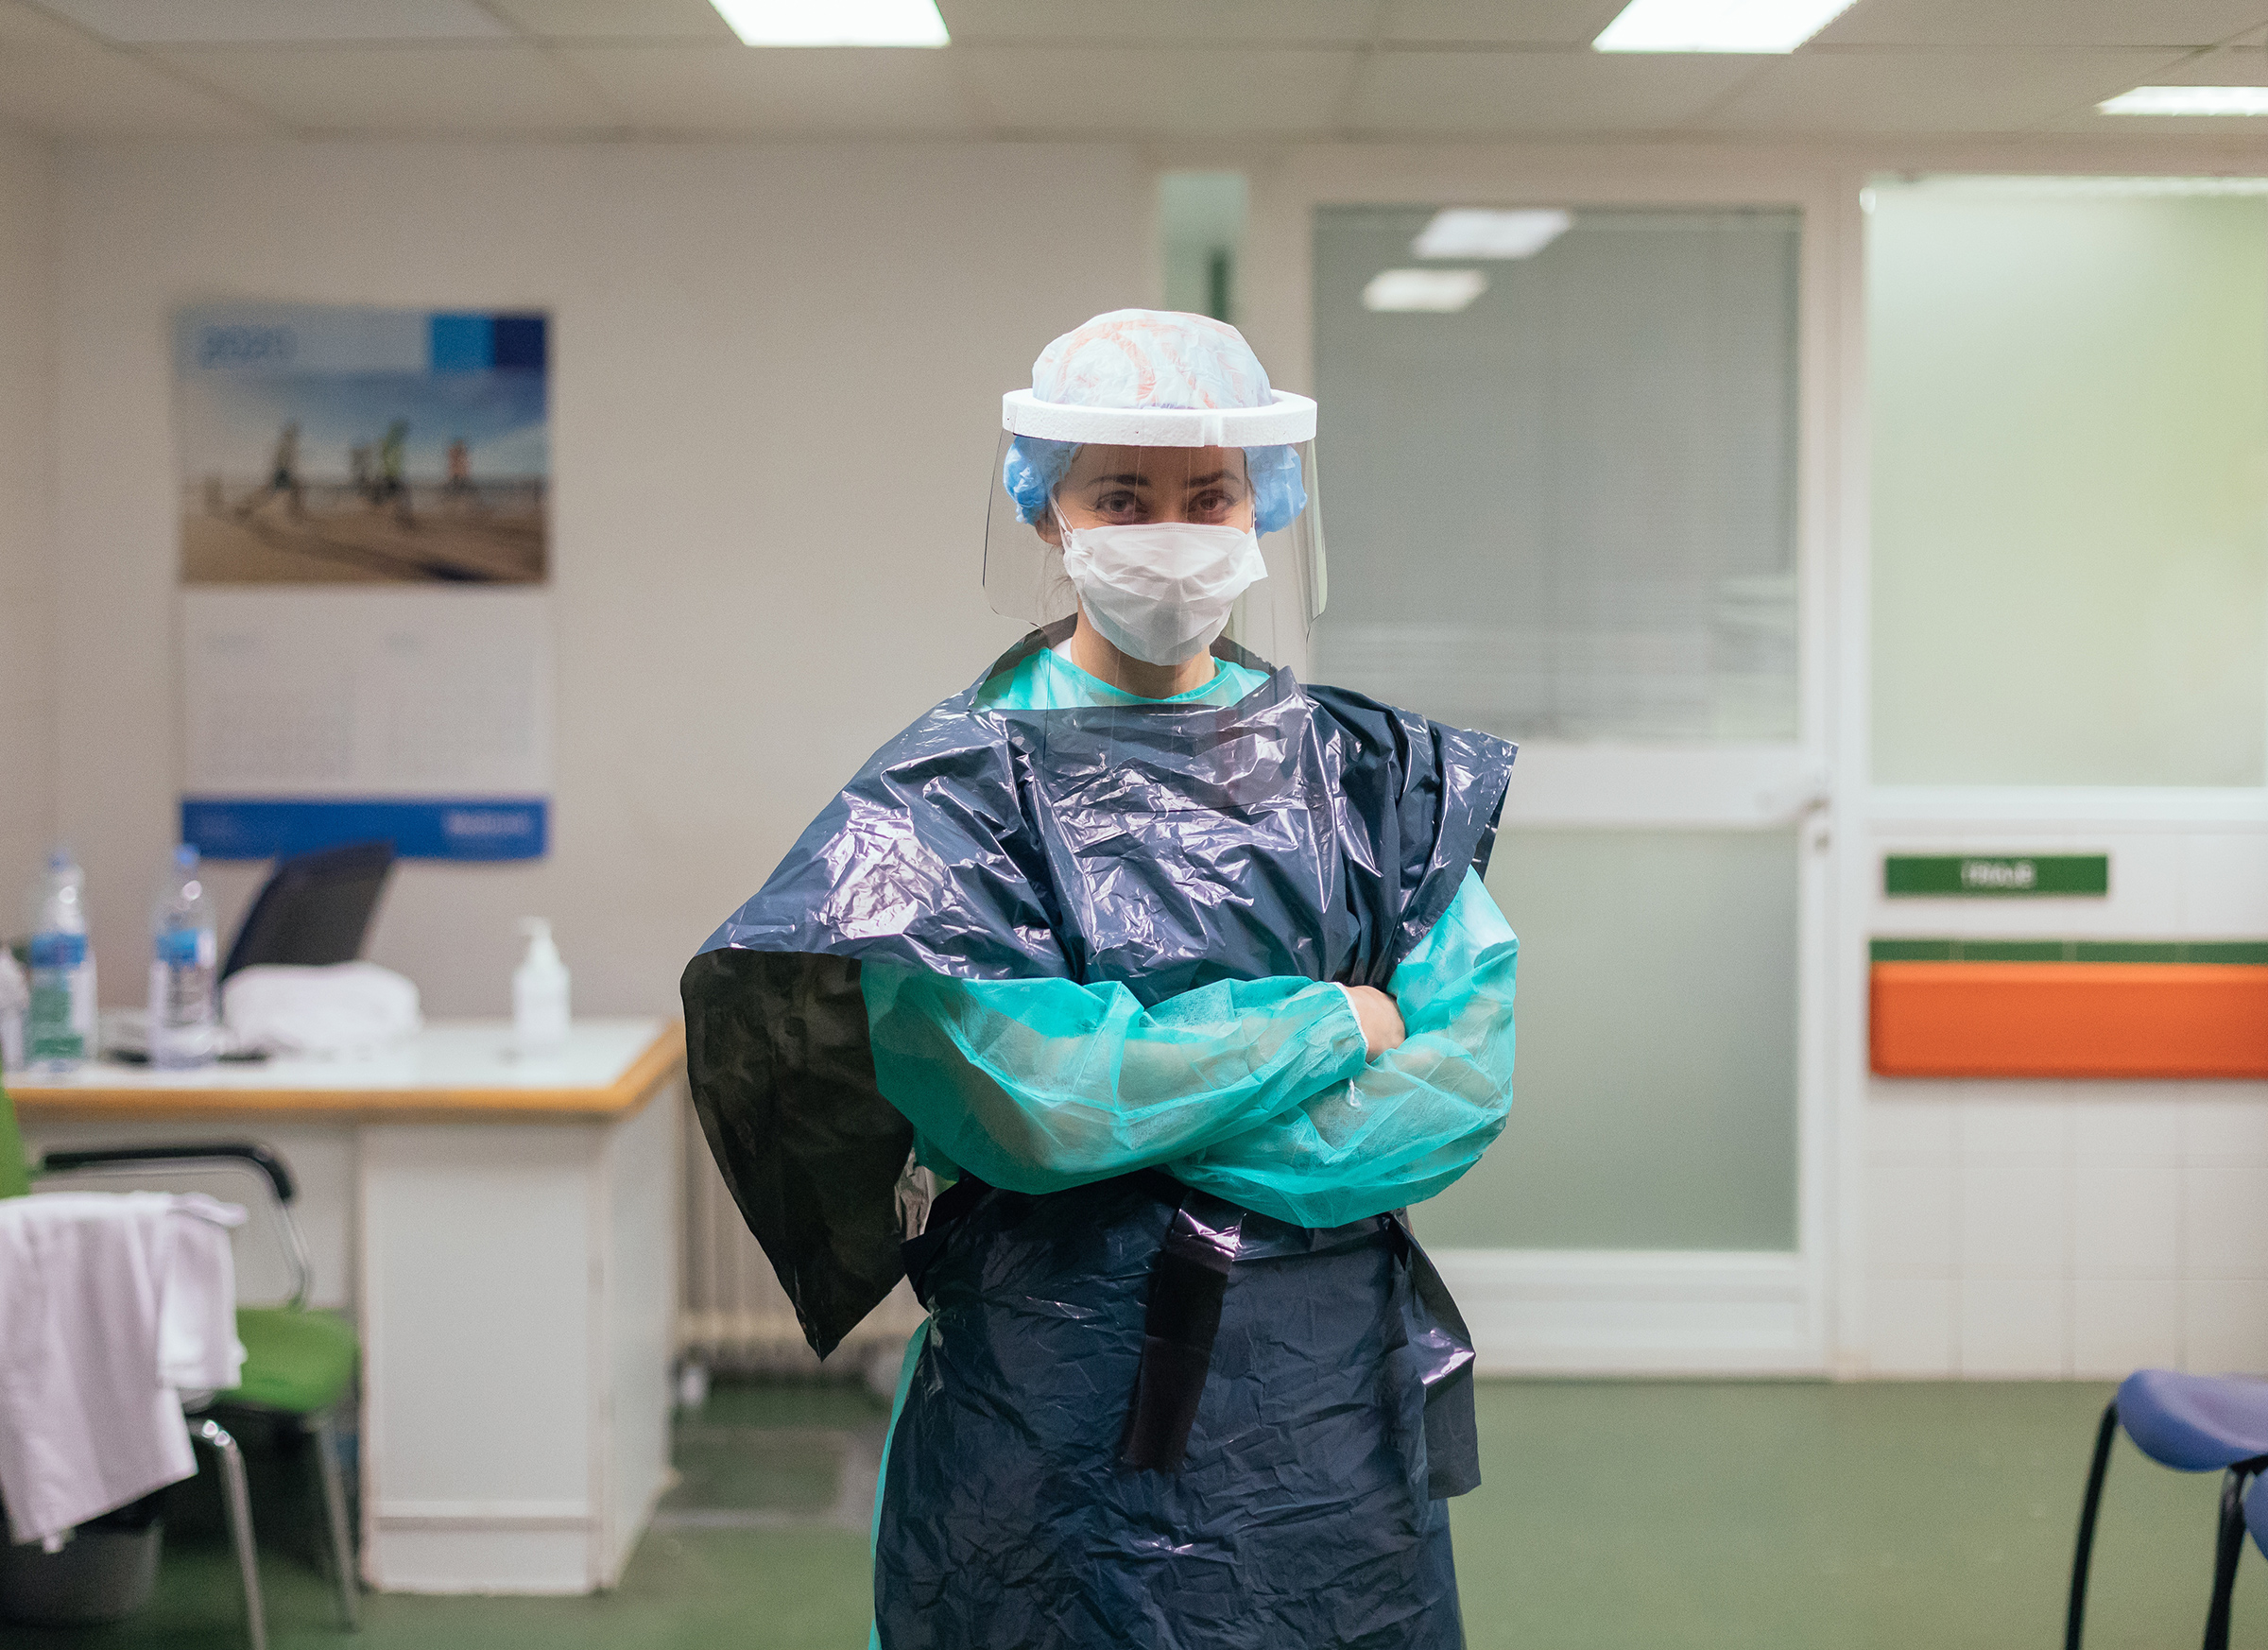 A Spanish emergency nurse, like many others around the world, has to rely on inadequate gear for protection (Alvaro Calvo—Getty Images)